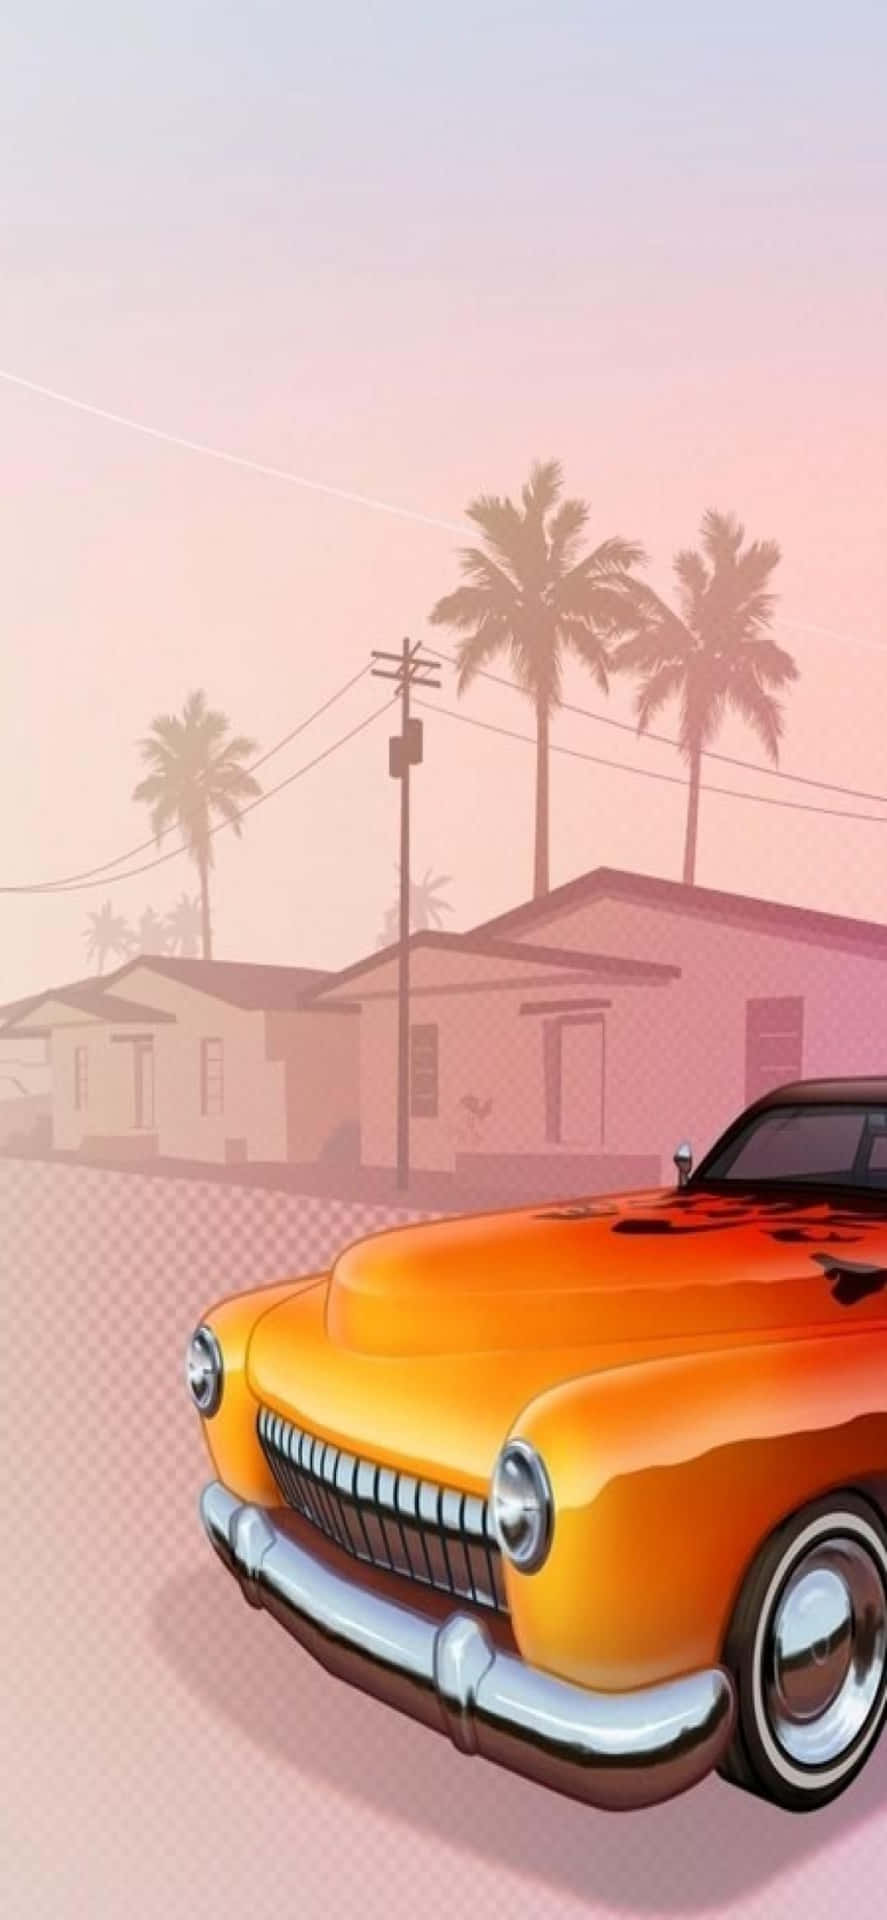 Iphone X Grand Theft Auto V Background&Car